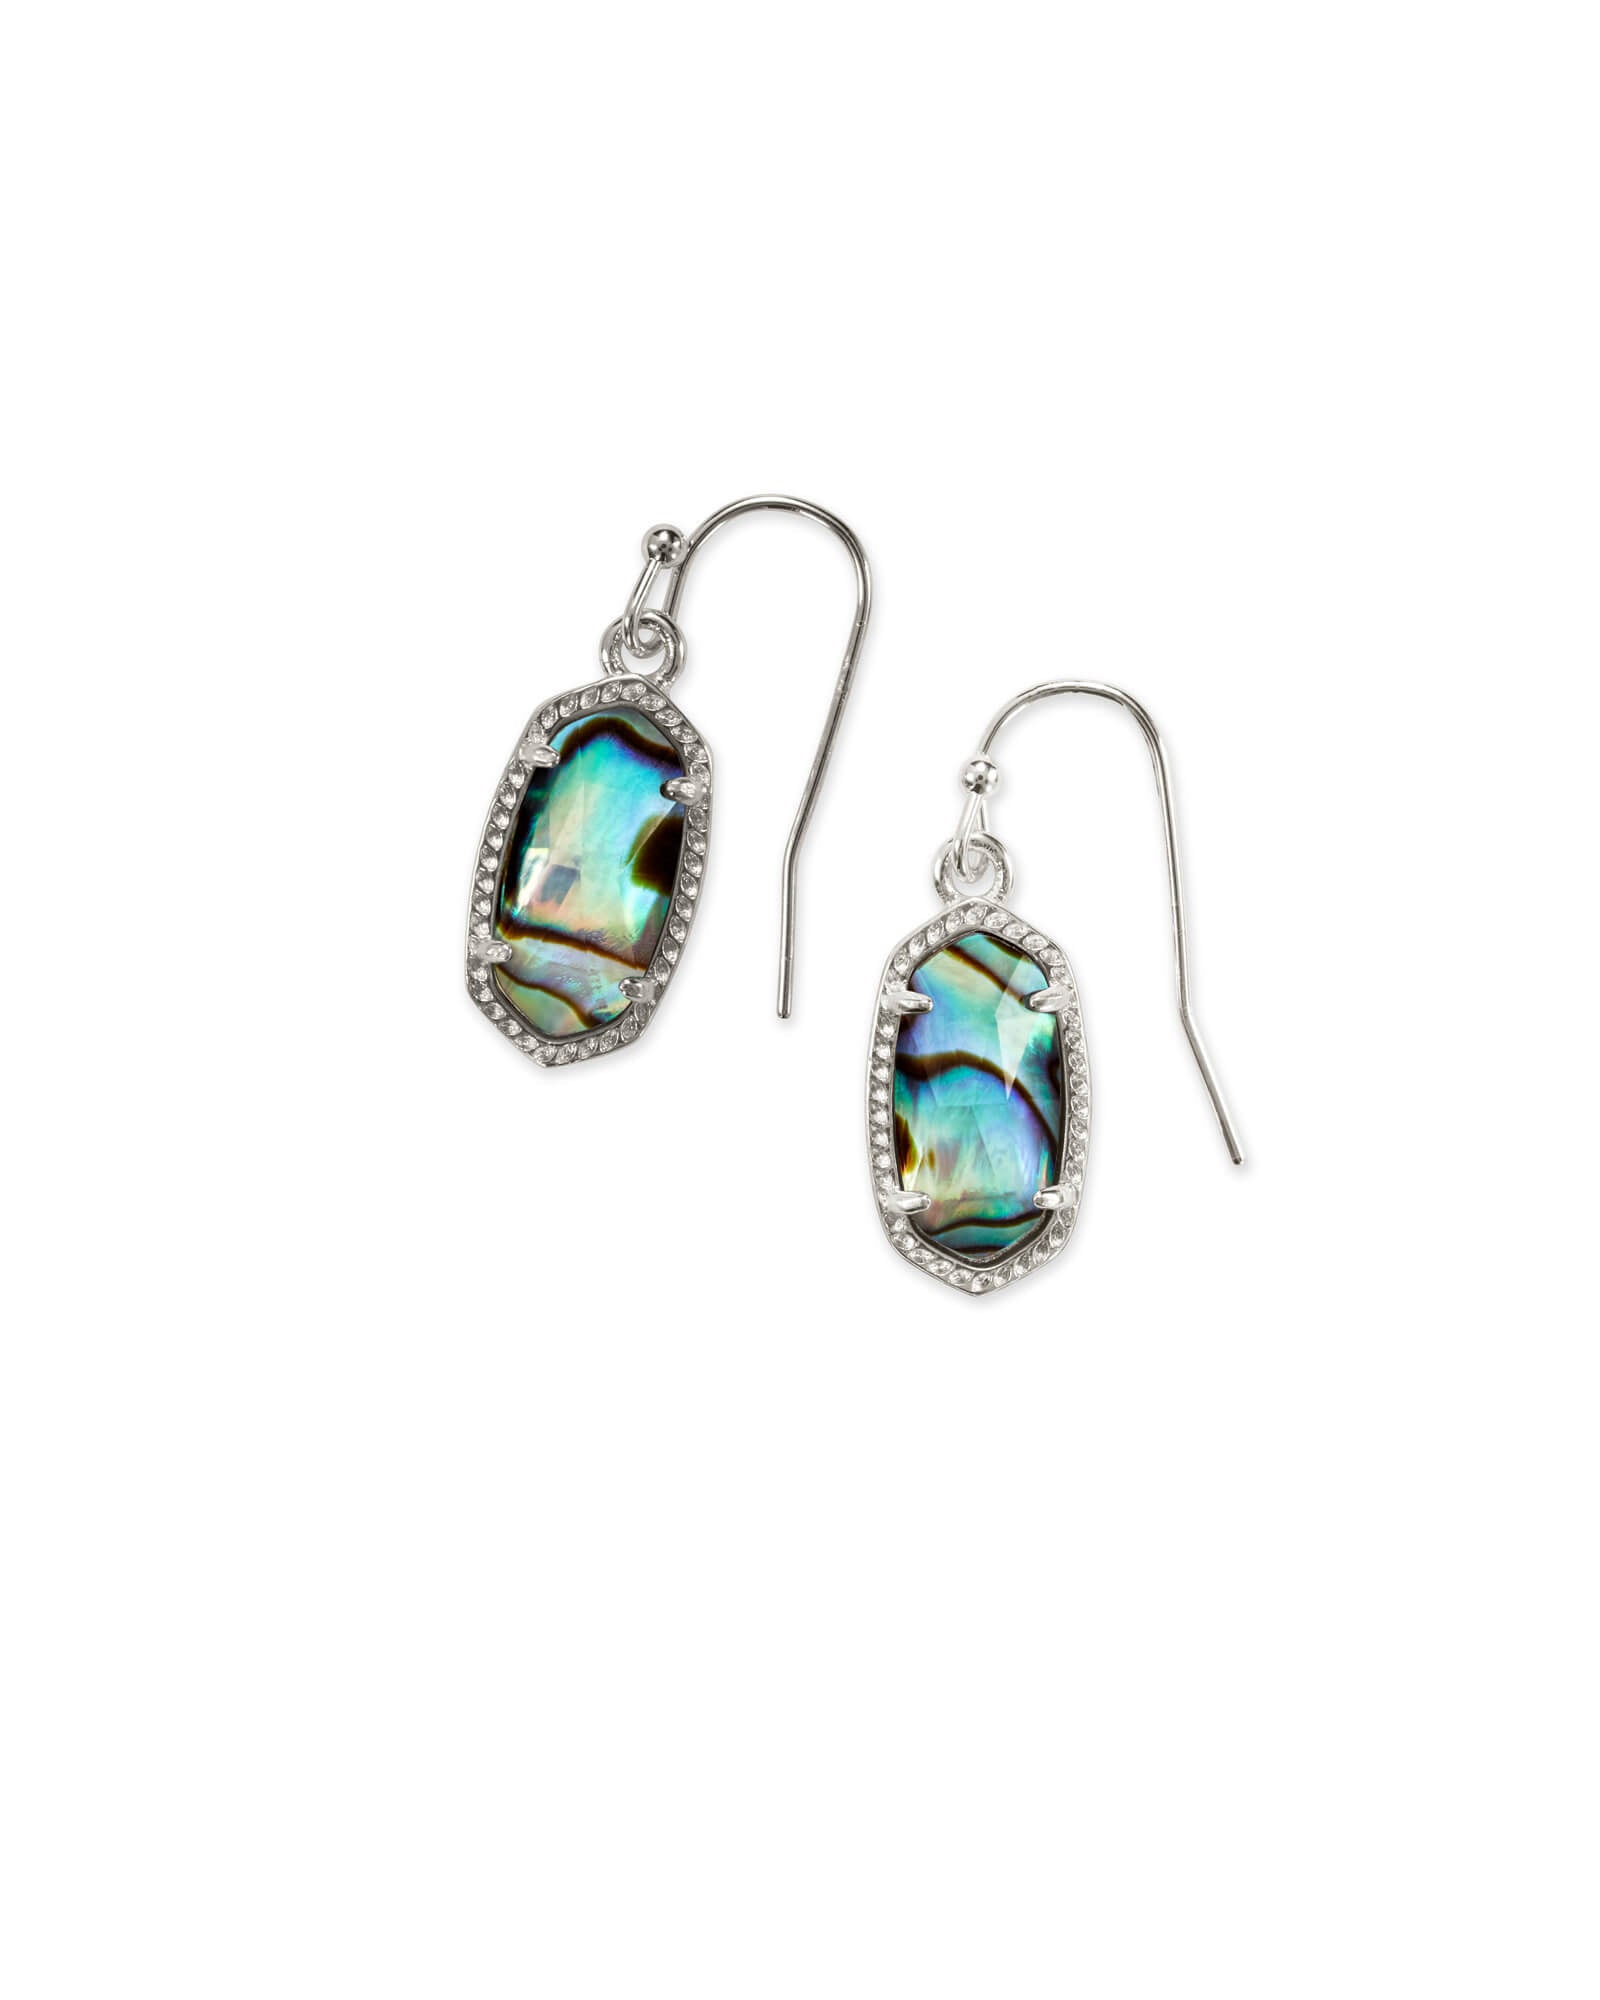 Lee Abalone Earring - Gold or Silver